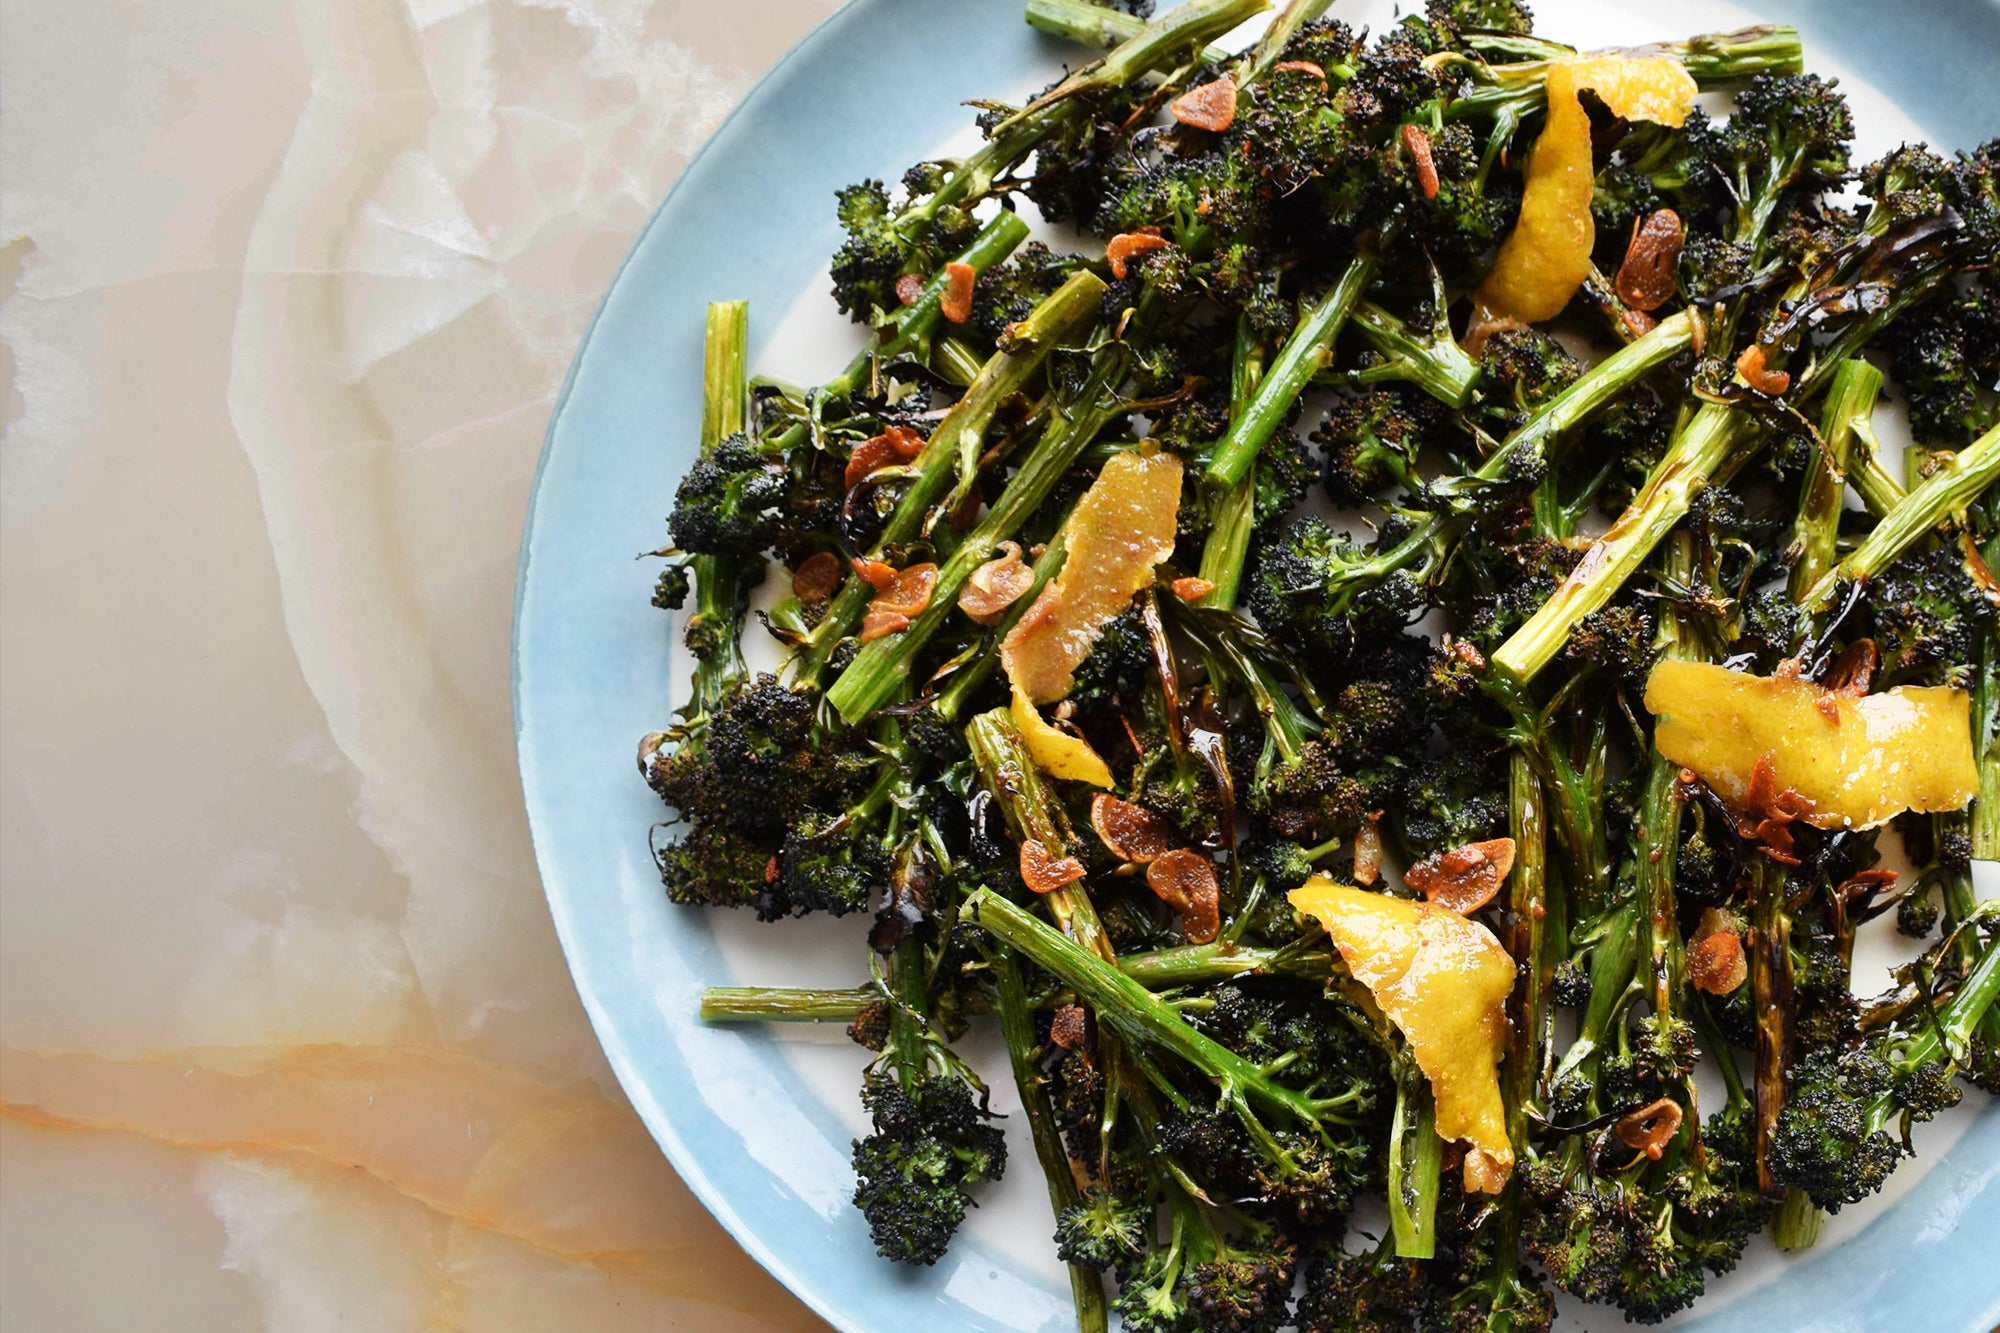 Sprouting broccoli with anchovies and lemon oil